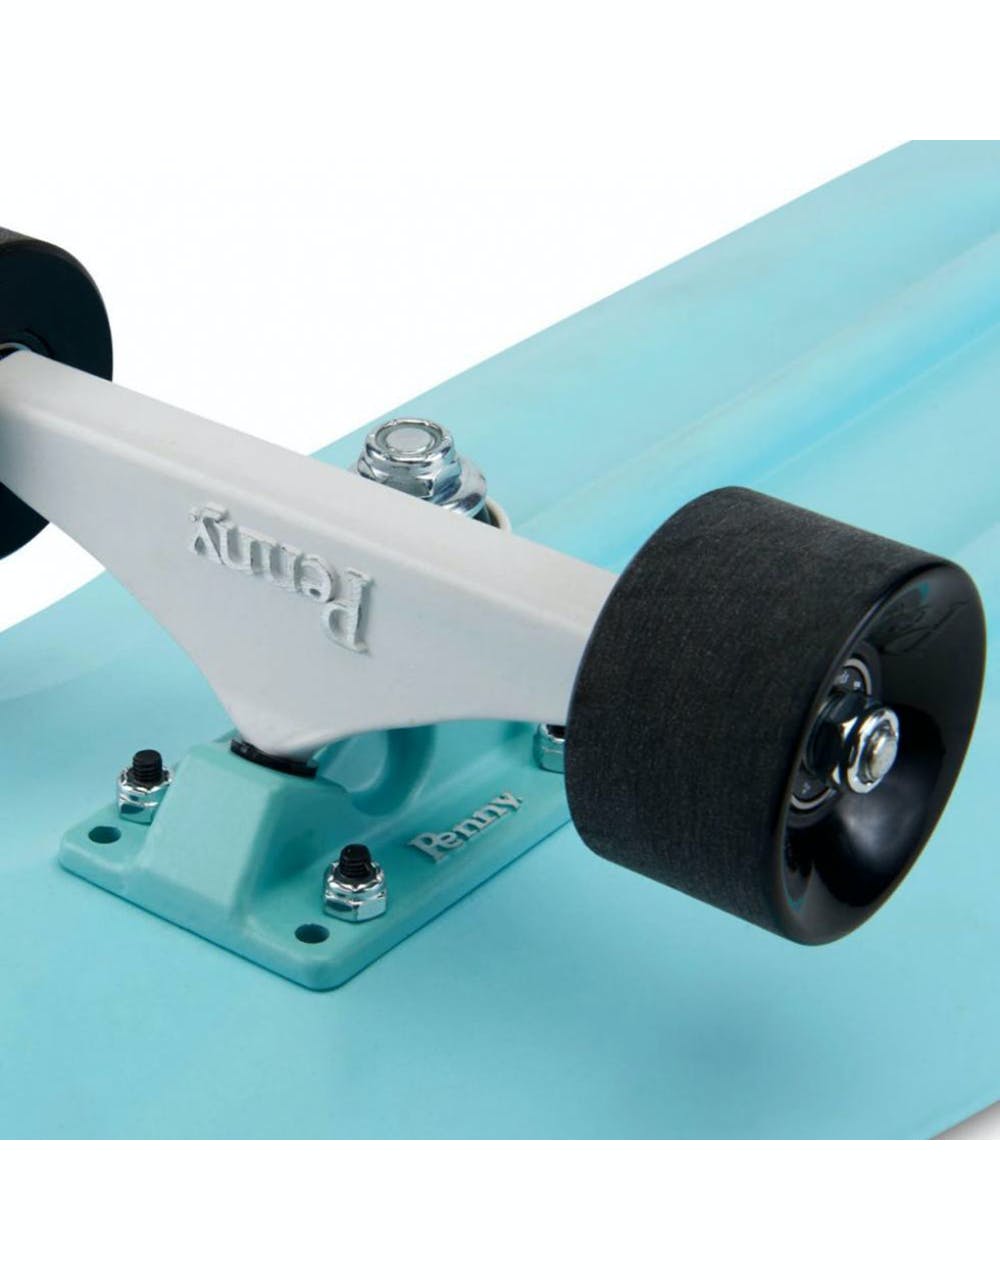 Penny Skateboards Classic Concave Cruiser - 32" - Mint/Black